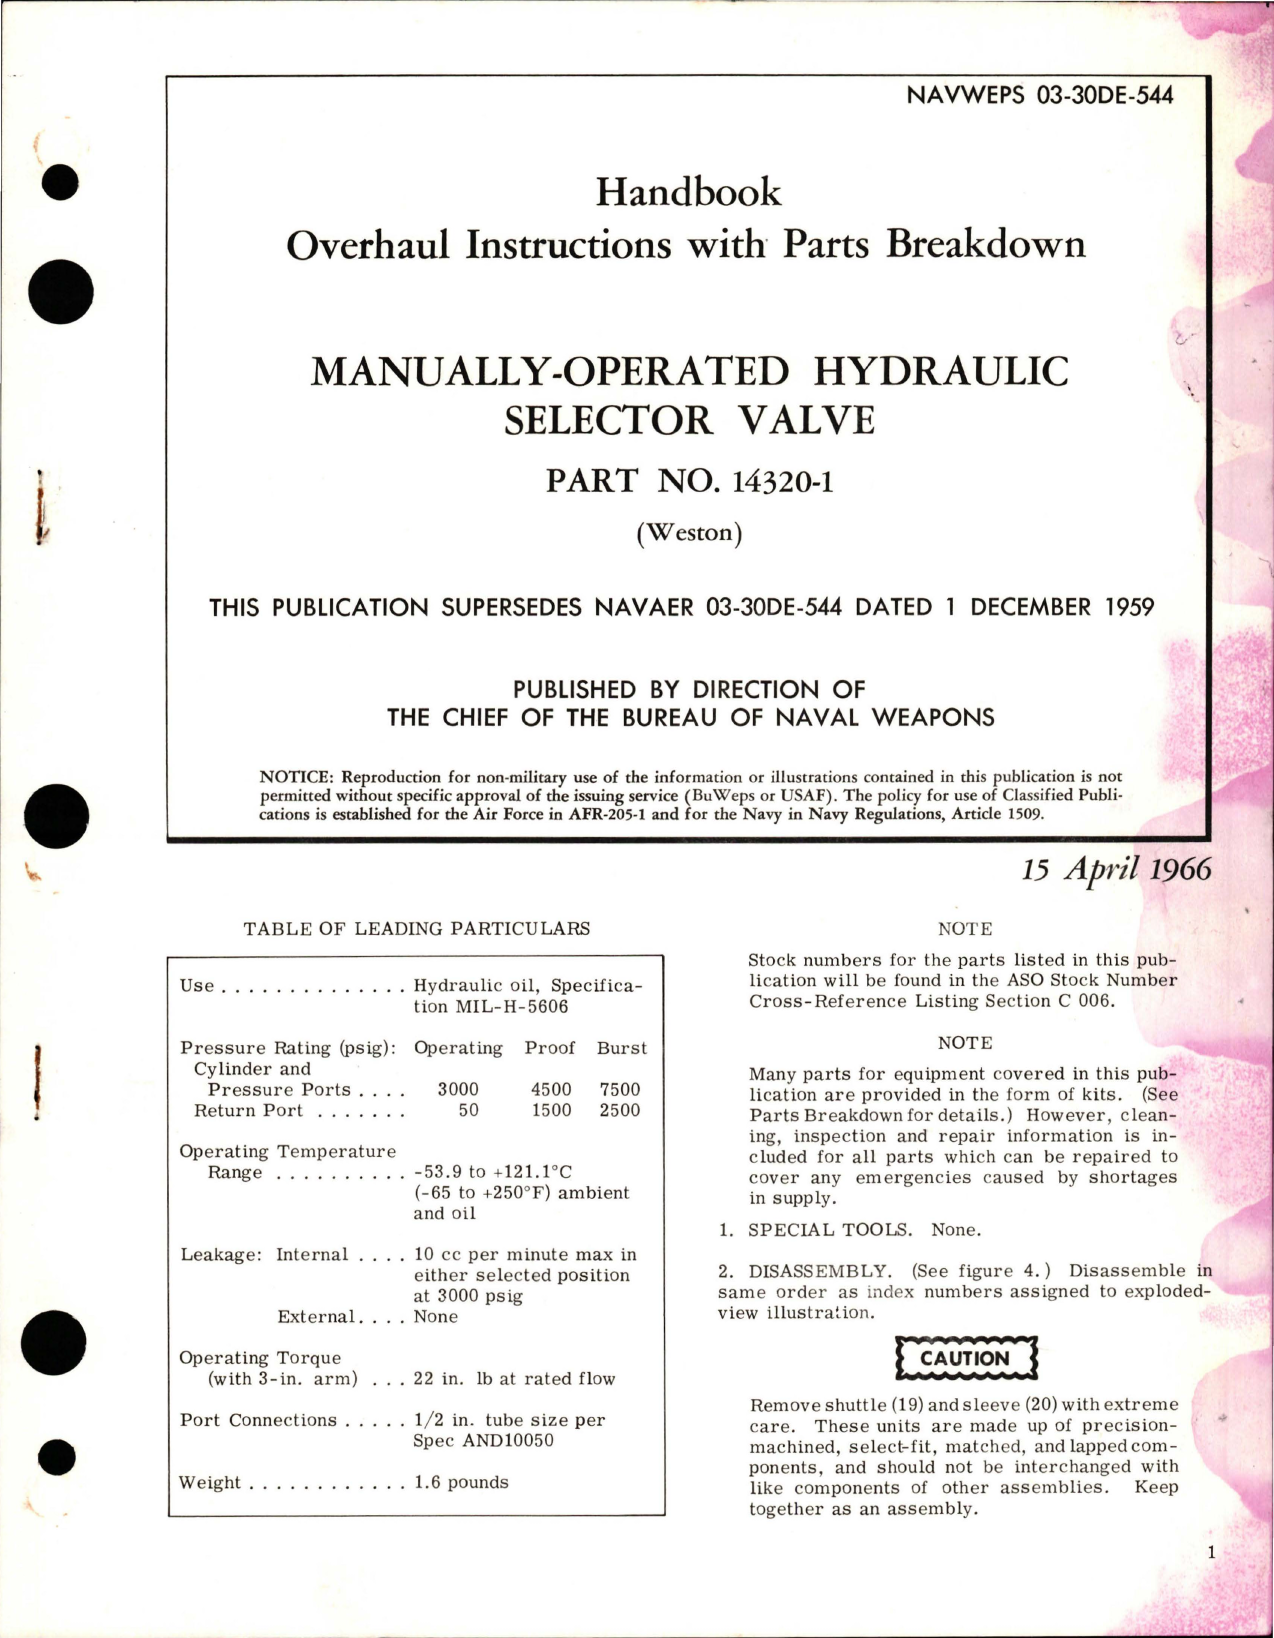 Sample page 1 from AirCorps Library document: Overhaul Instructions with Parts Breakdown for Manually-Operated Hydraulic Selector Valve - Part 14320-1